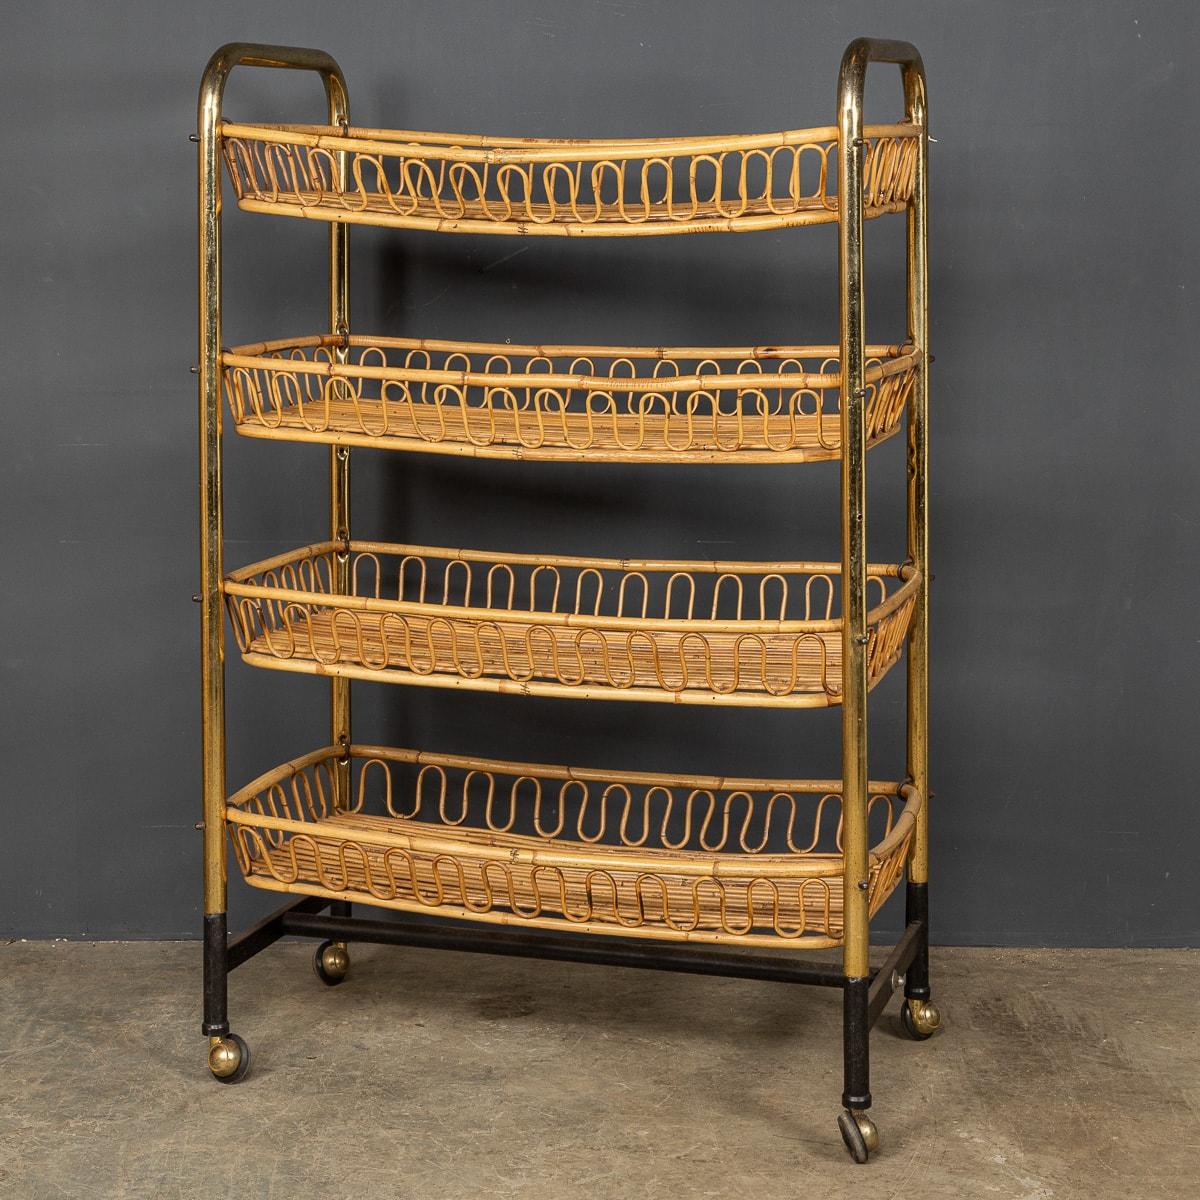 Antique early 20th century French large four tier wicker and brass trolley, used in hotels and restaurants, to display breads and pastries. Dating from before the Second World War.

CONDITION
In Great Condition - wear consistent with age, please